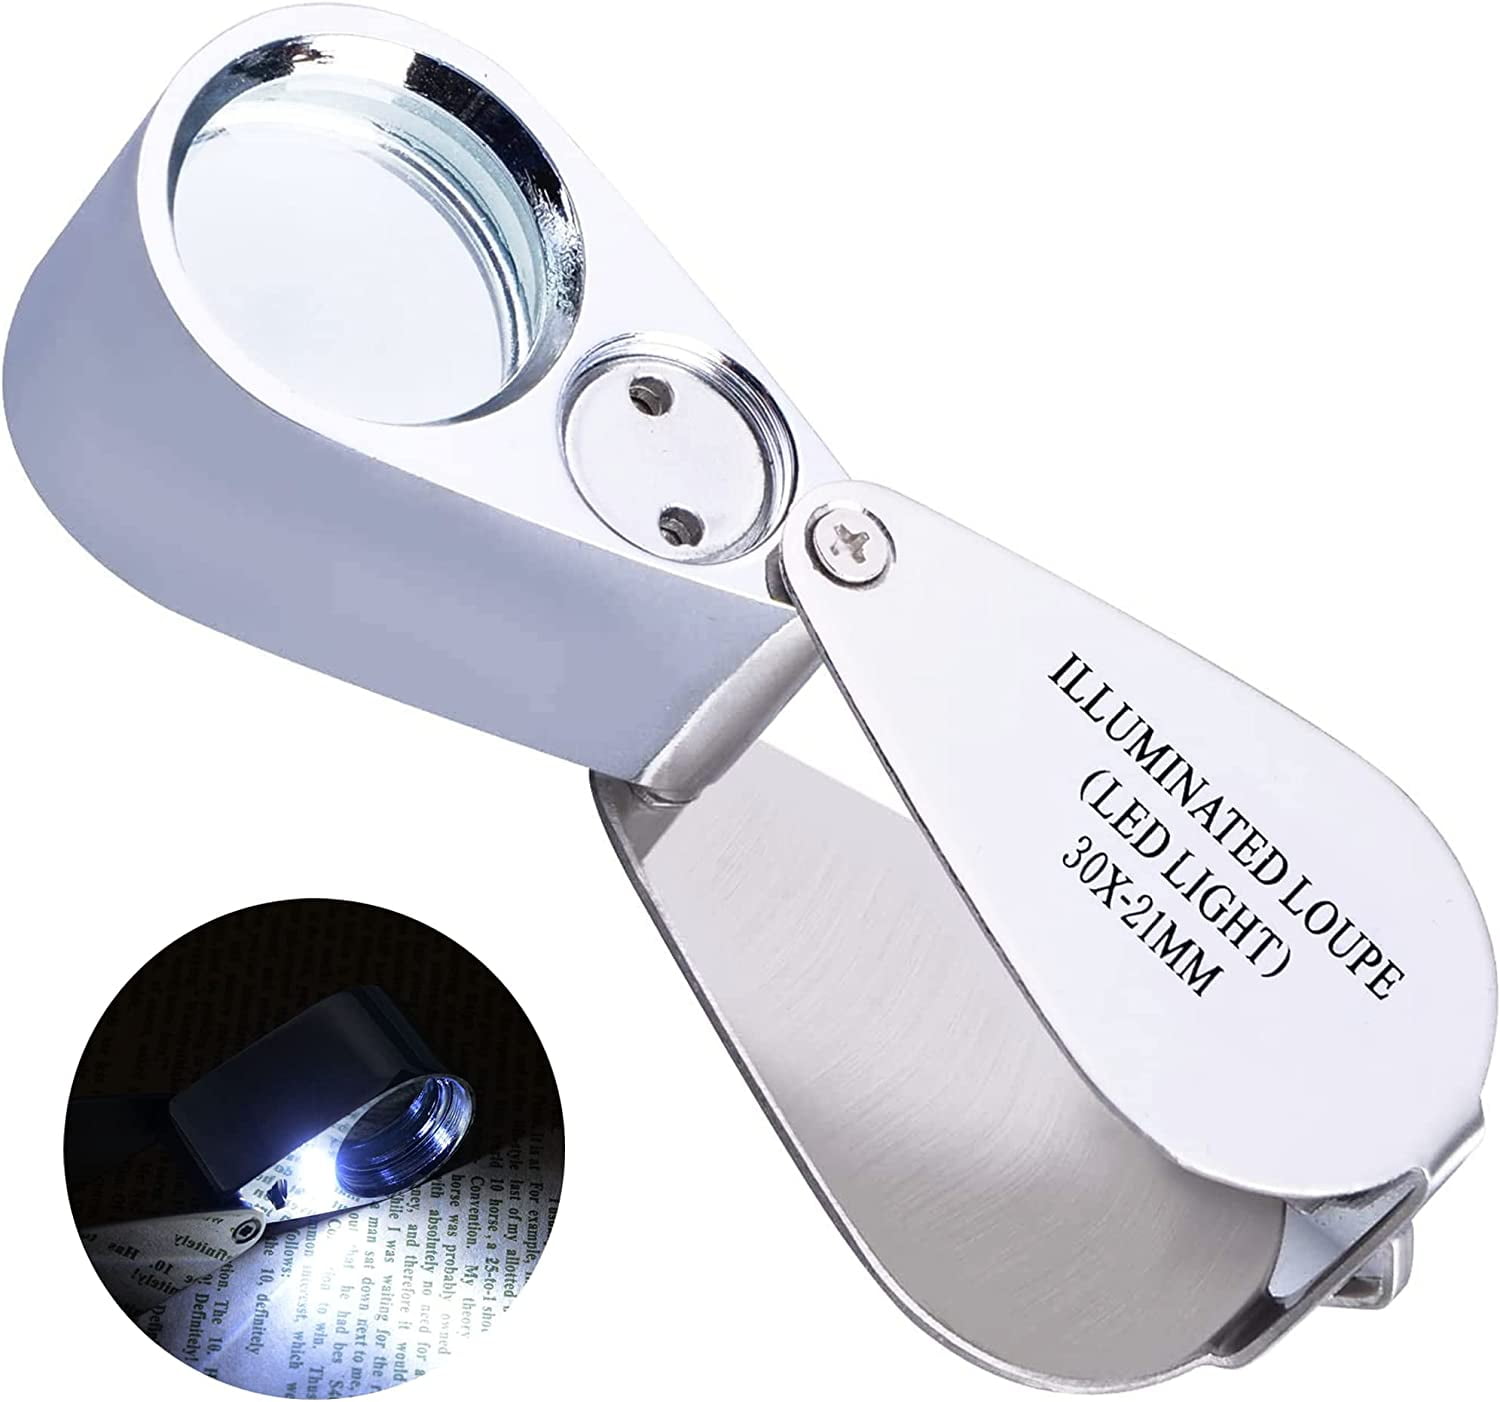 Jewelers Loupe Magnifier with Light 40x Foldable Magnifying Glass for Coins Diamonds Jewelry Gems Plants Watches Stamps Etc, Women's, Size: Small